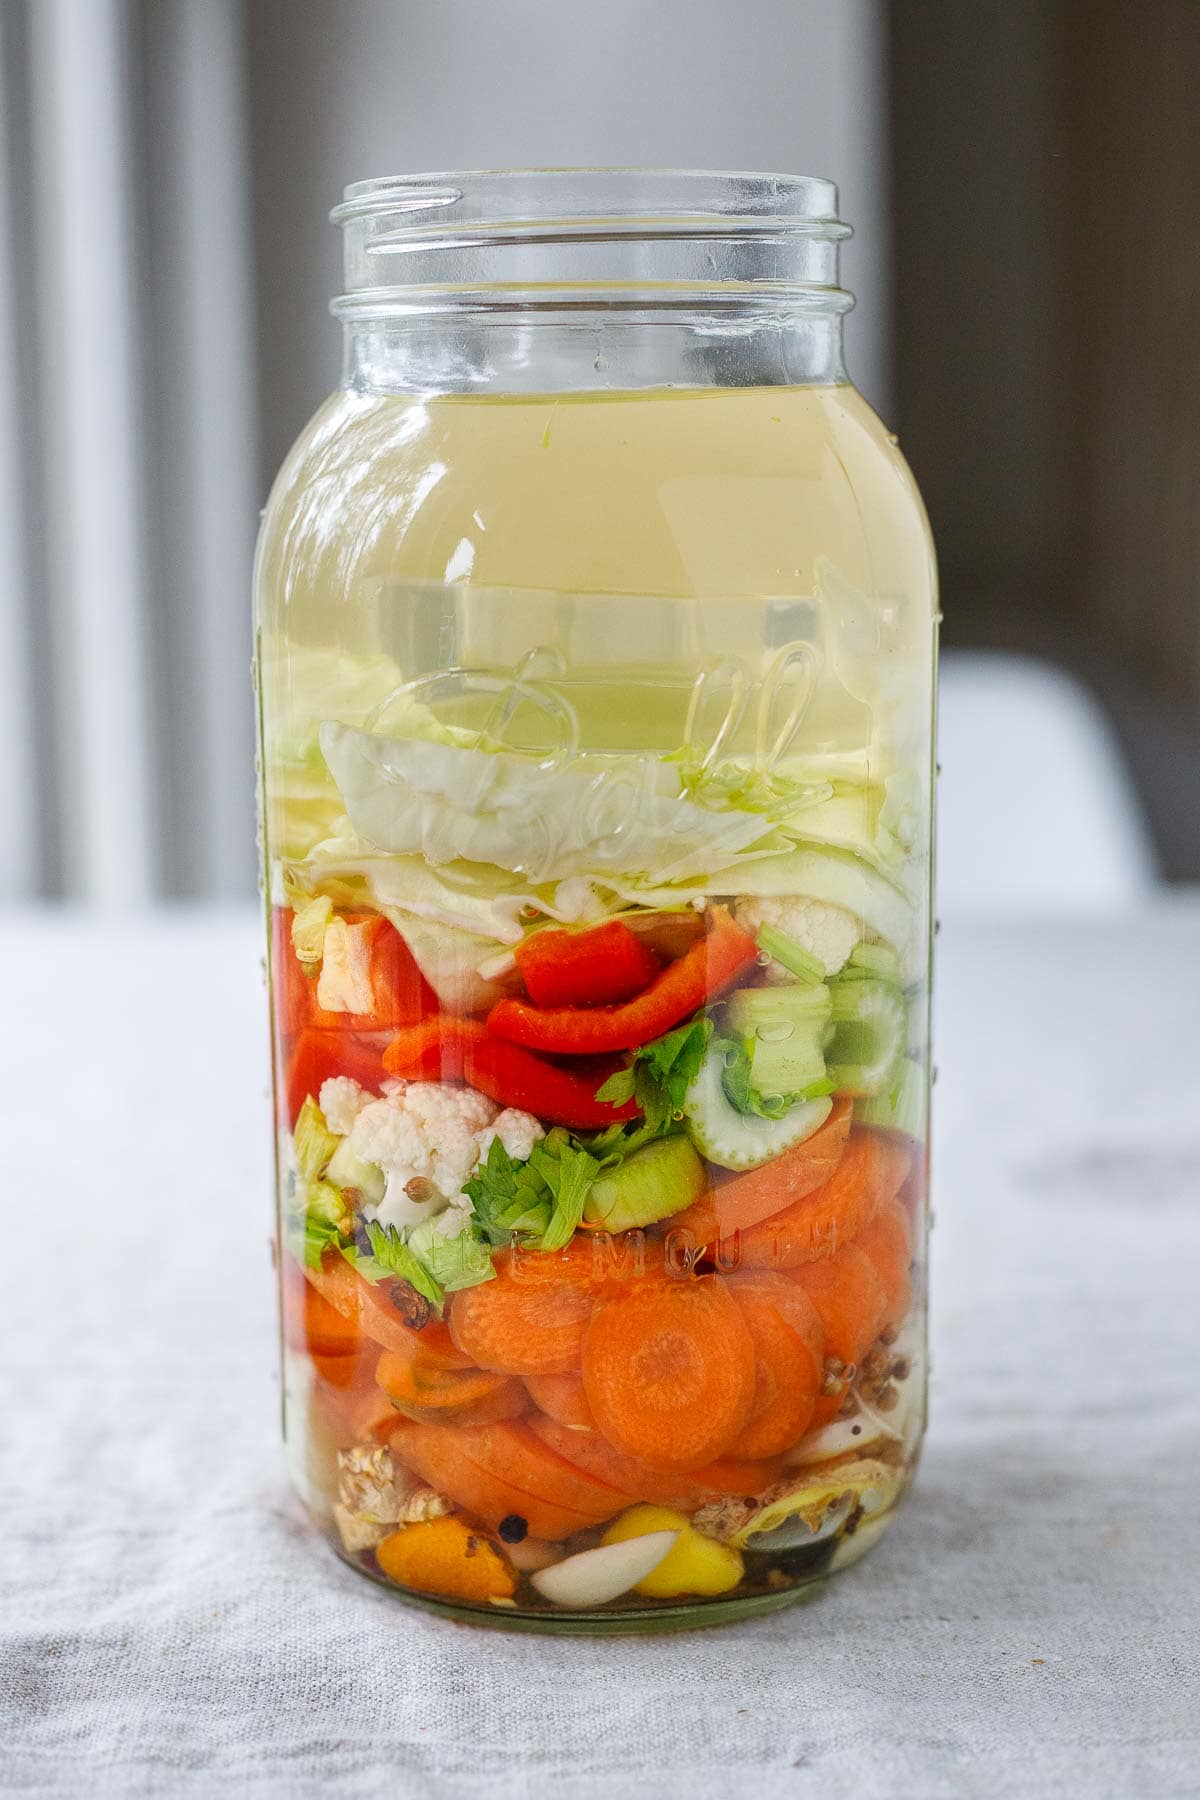 Rich in probiotics, the Gut Shot is a fermented vegetable drink that supports gut health by creating diversity in the gut microbiome—an easy step-by-step guide using veggies you already have with just 15 minutes of hands-on time. 